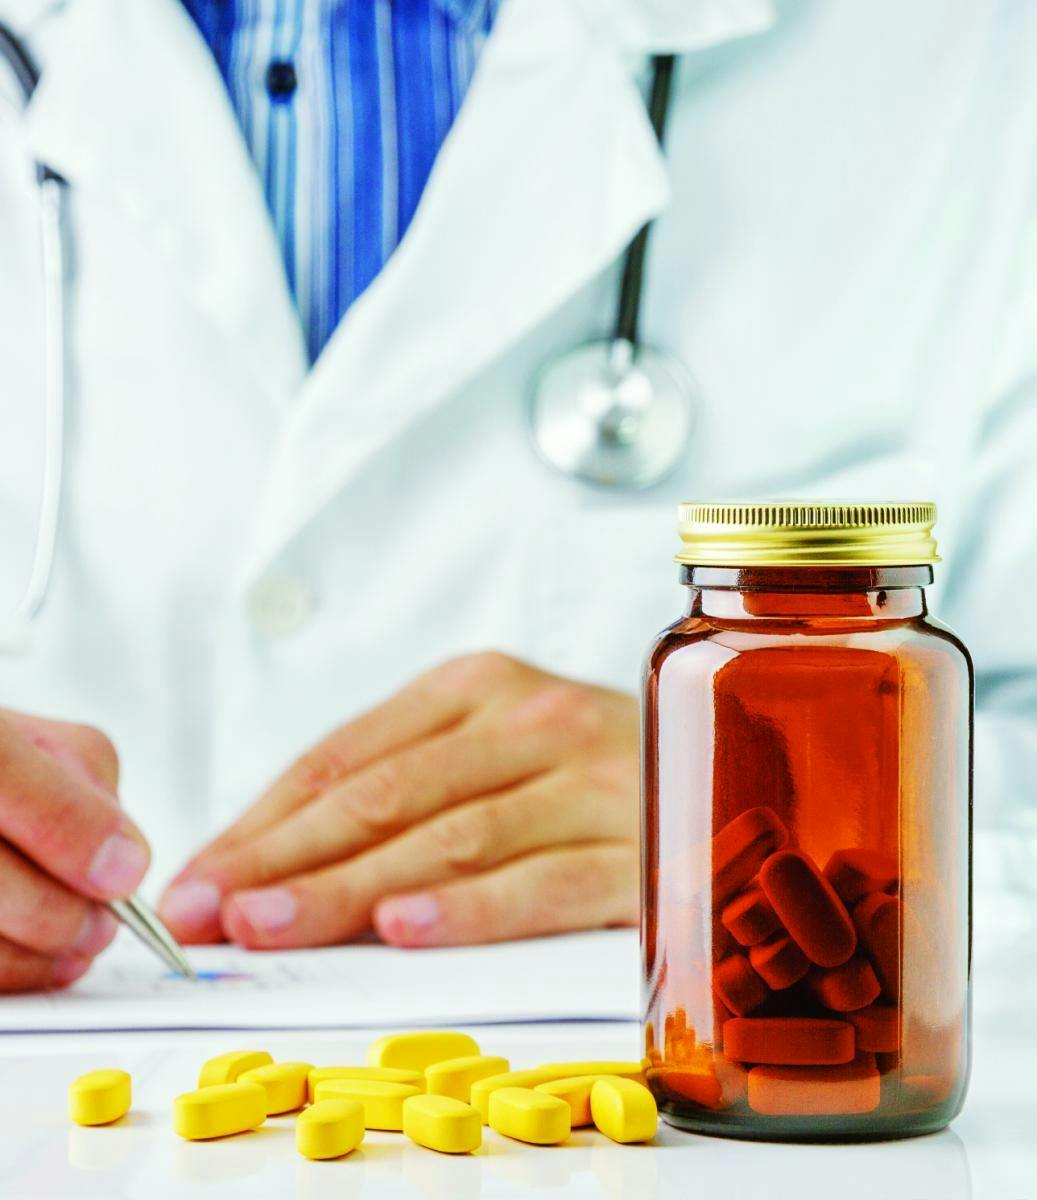 Communication Failure about Supplement Use between Patients and Physicians?